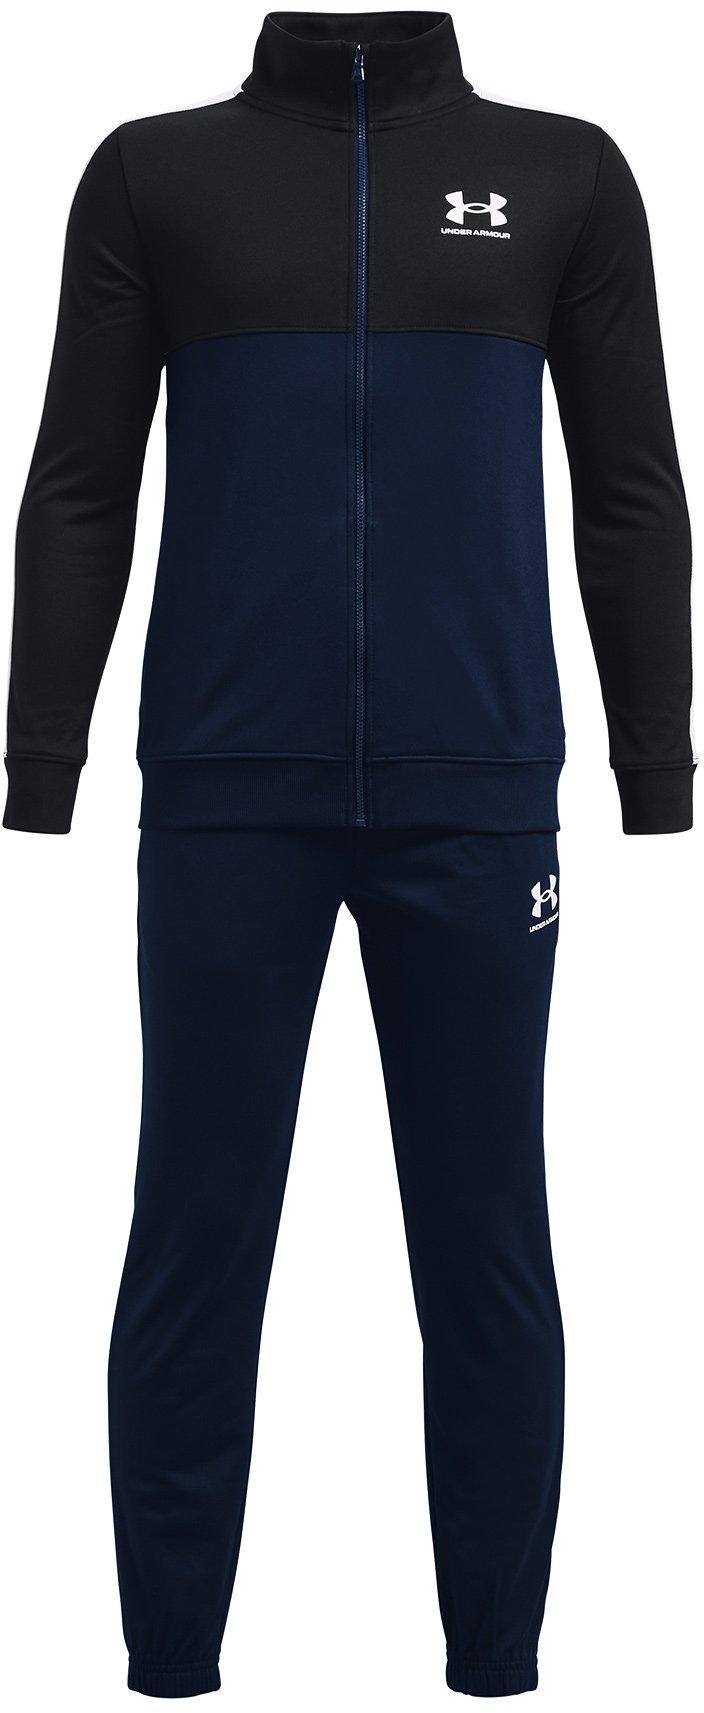 Under Armour CB Knit Track Suit-NVY M